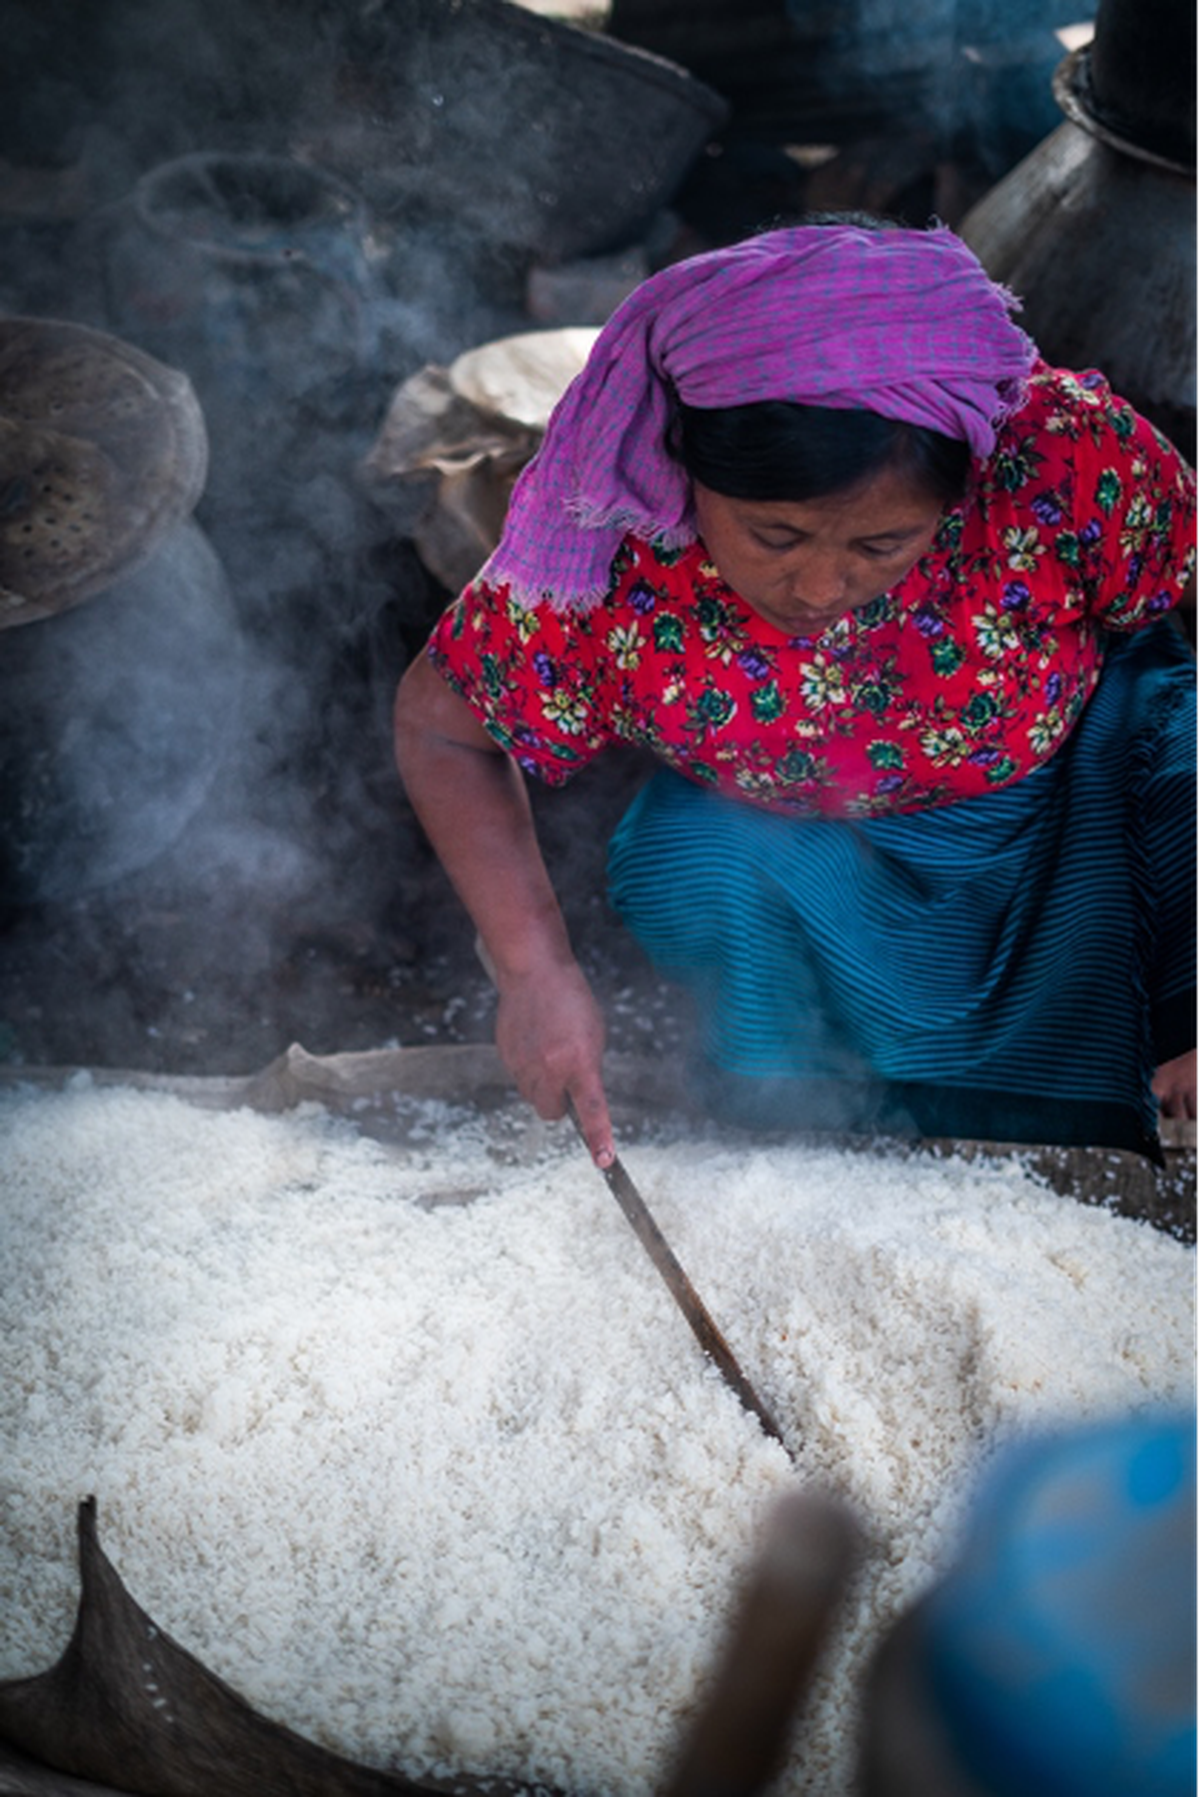 A woman preparing rice to brew alcohol